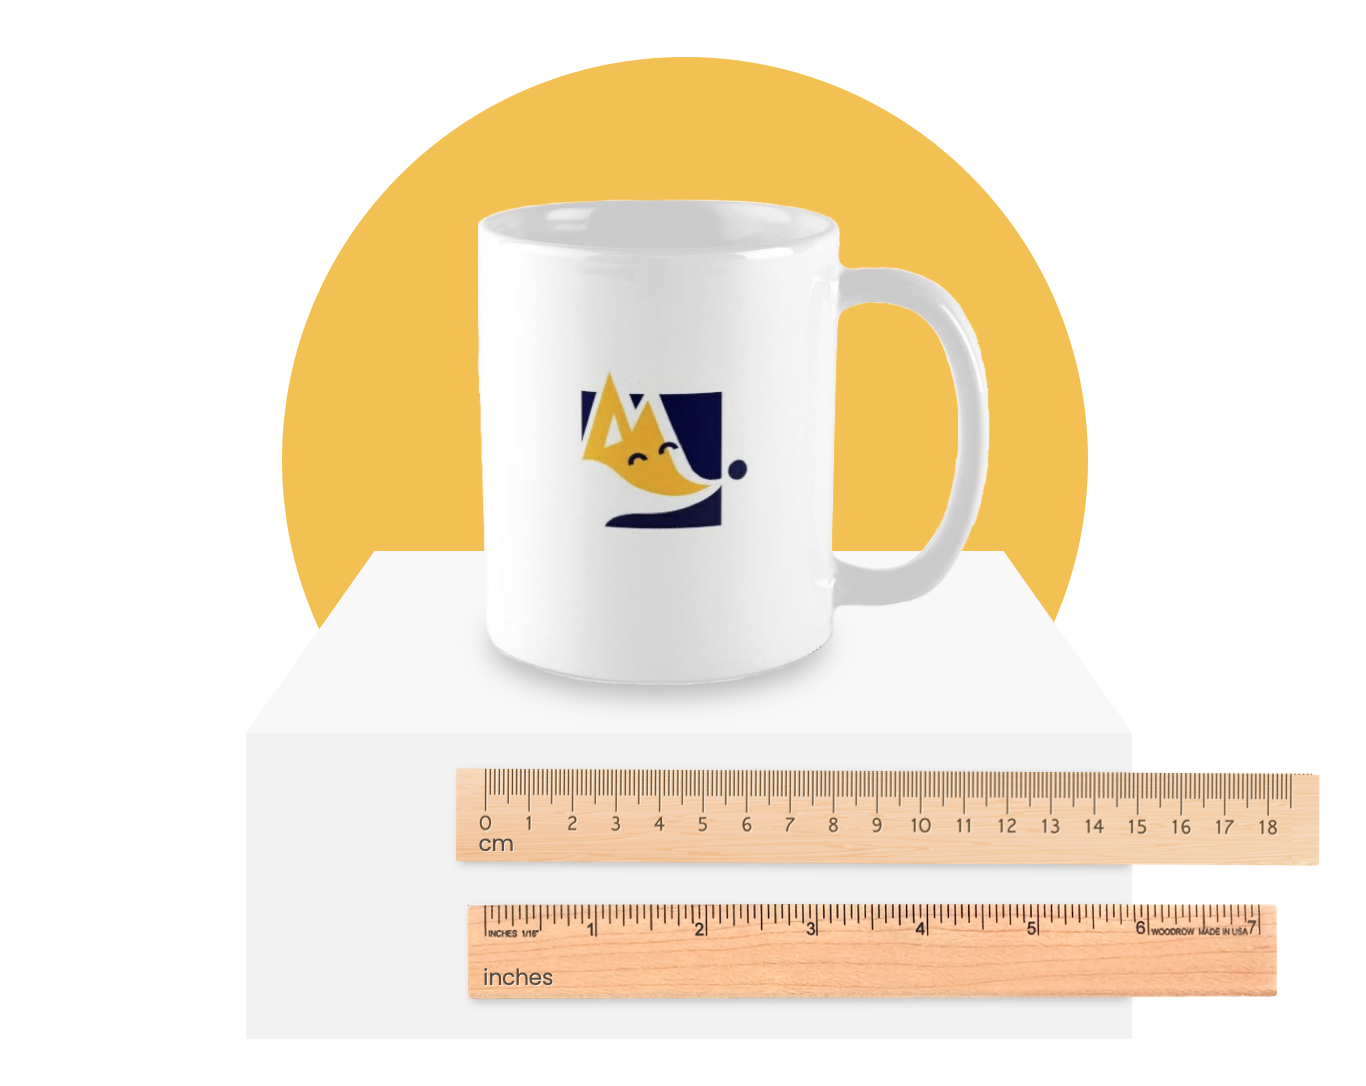 A mug being measuring with a cm ruler and an inches ruler.